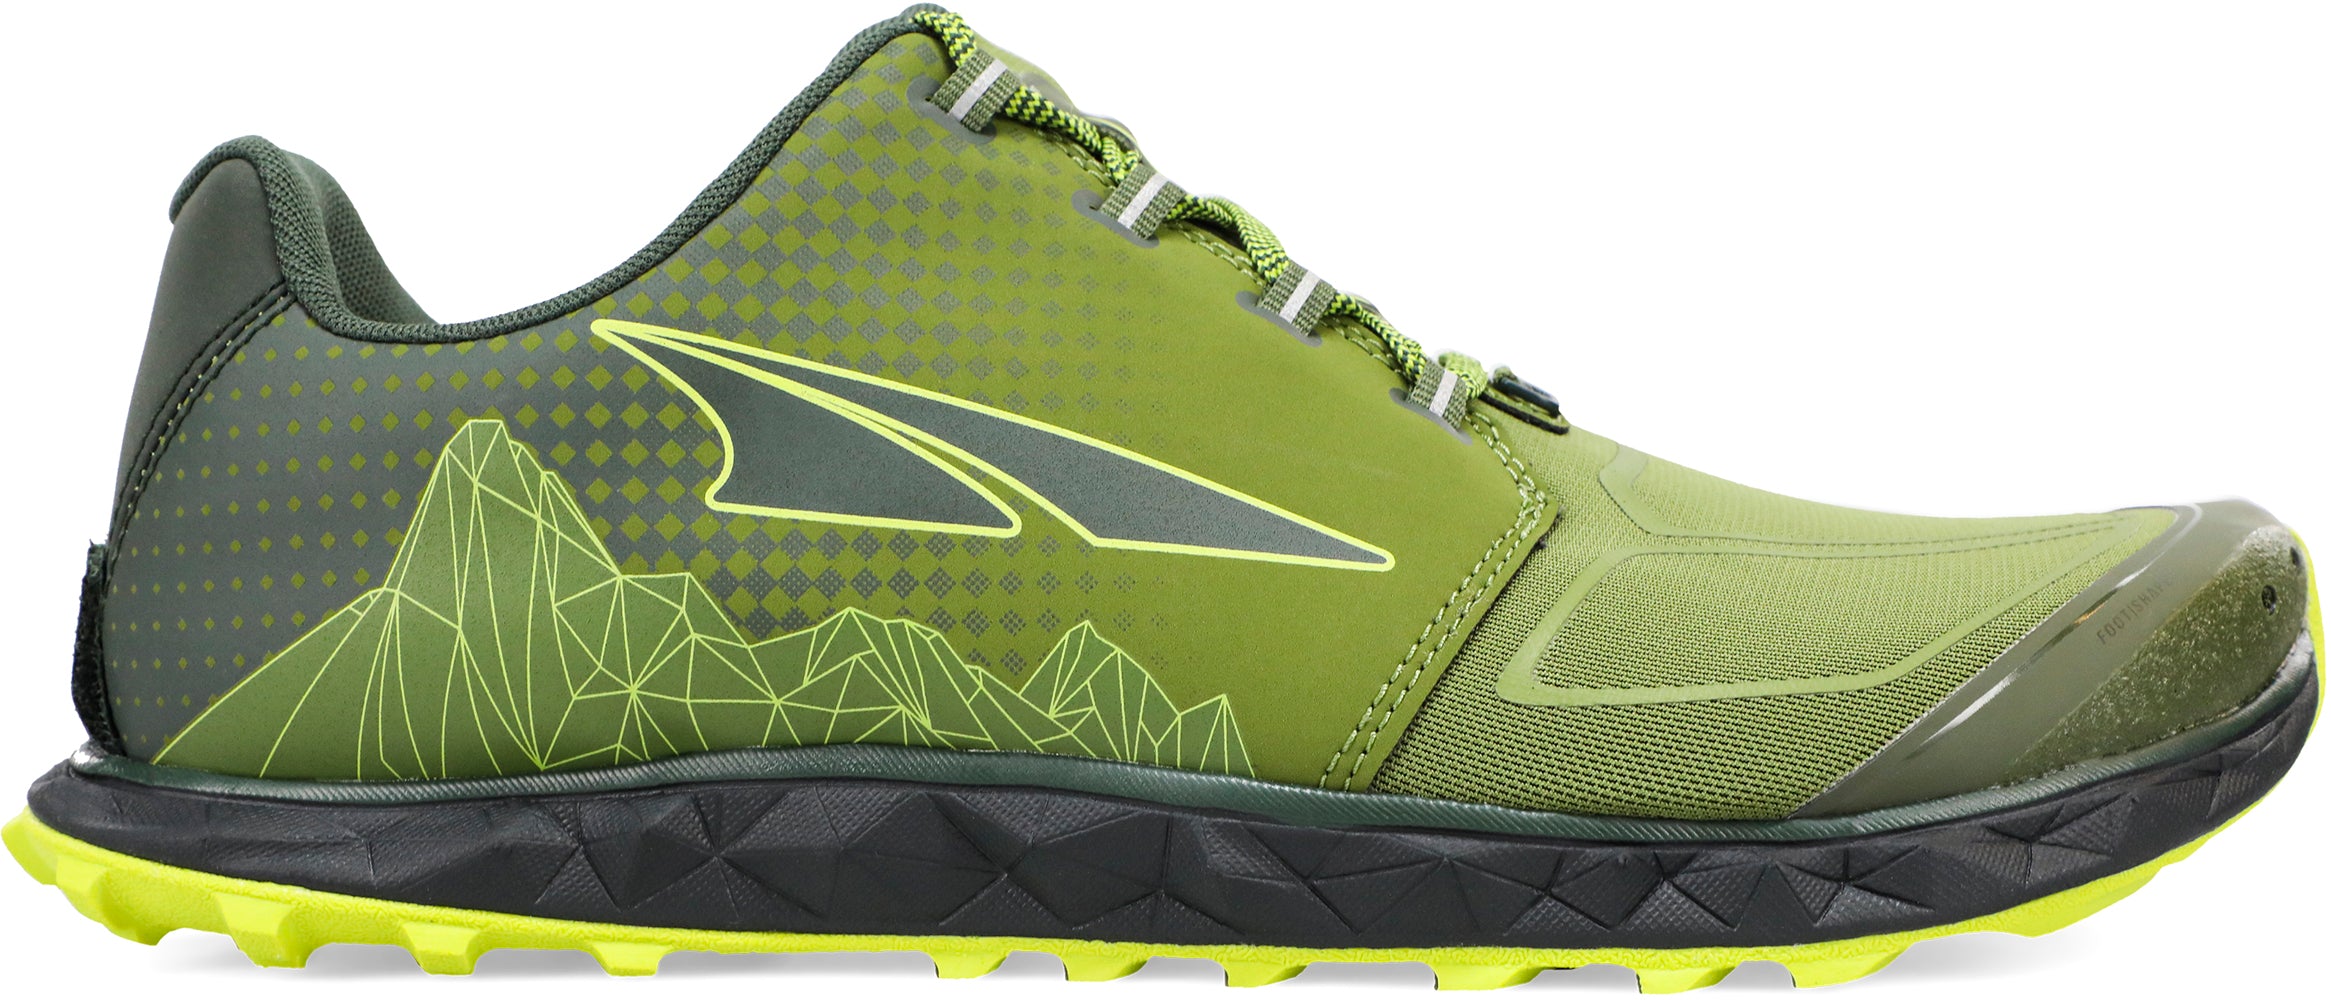 Altra Men's Superior 4.5 Trail Running Shoe in Green/Lime Side View